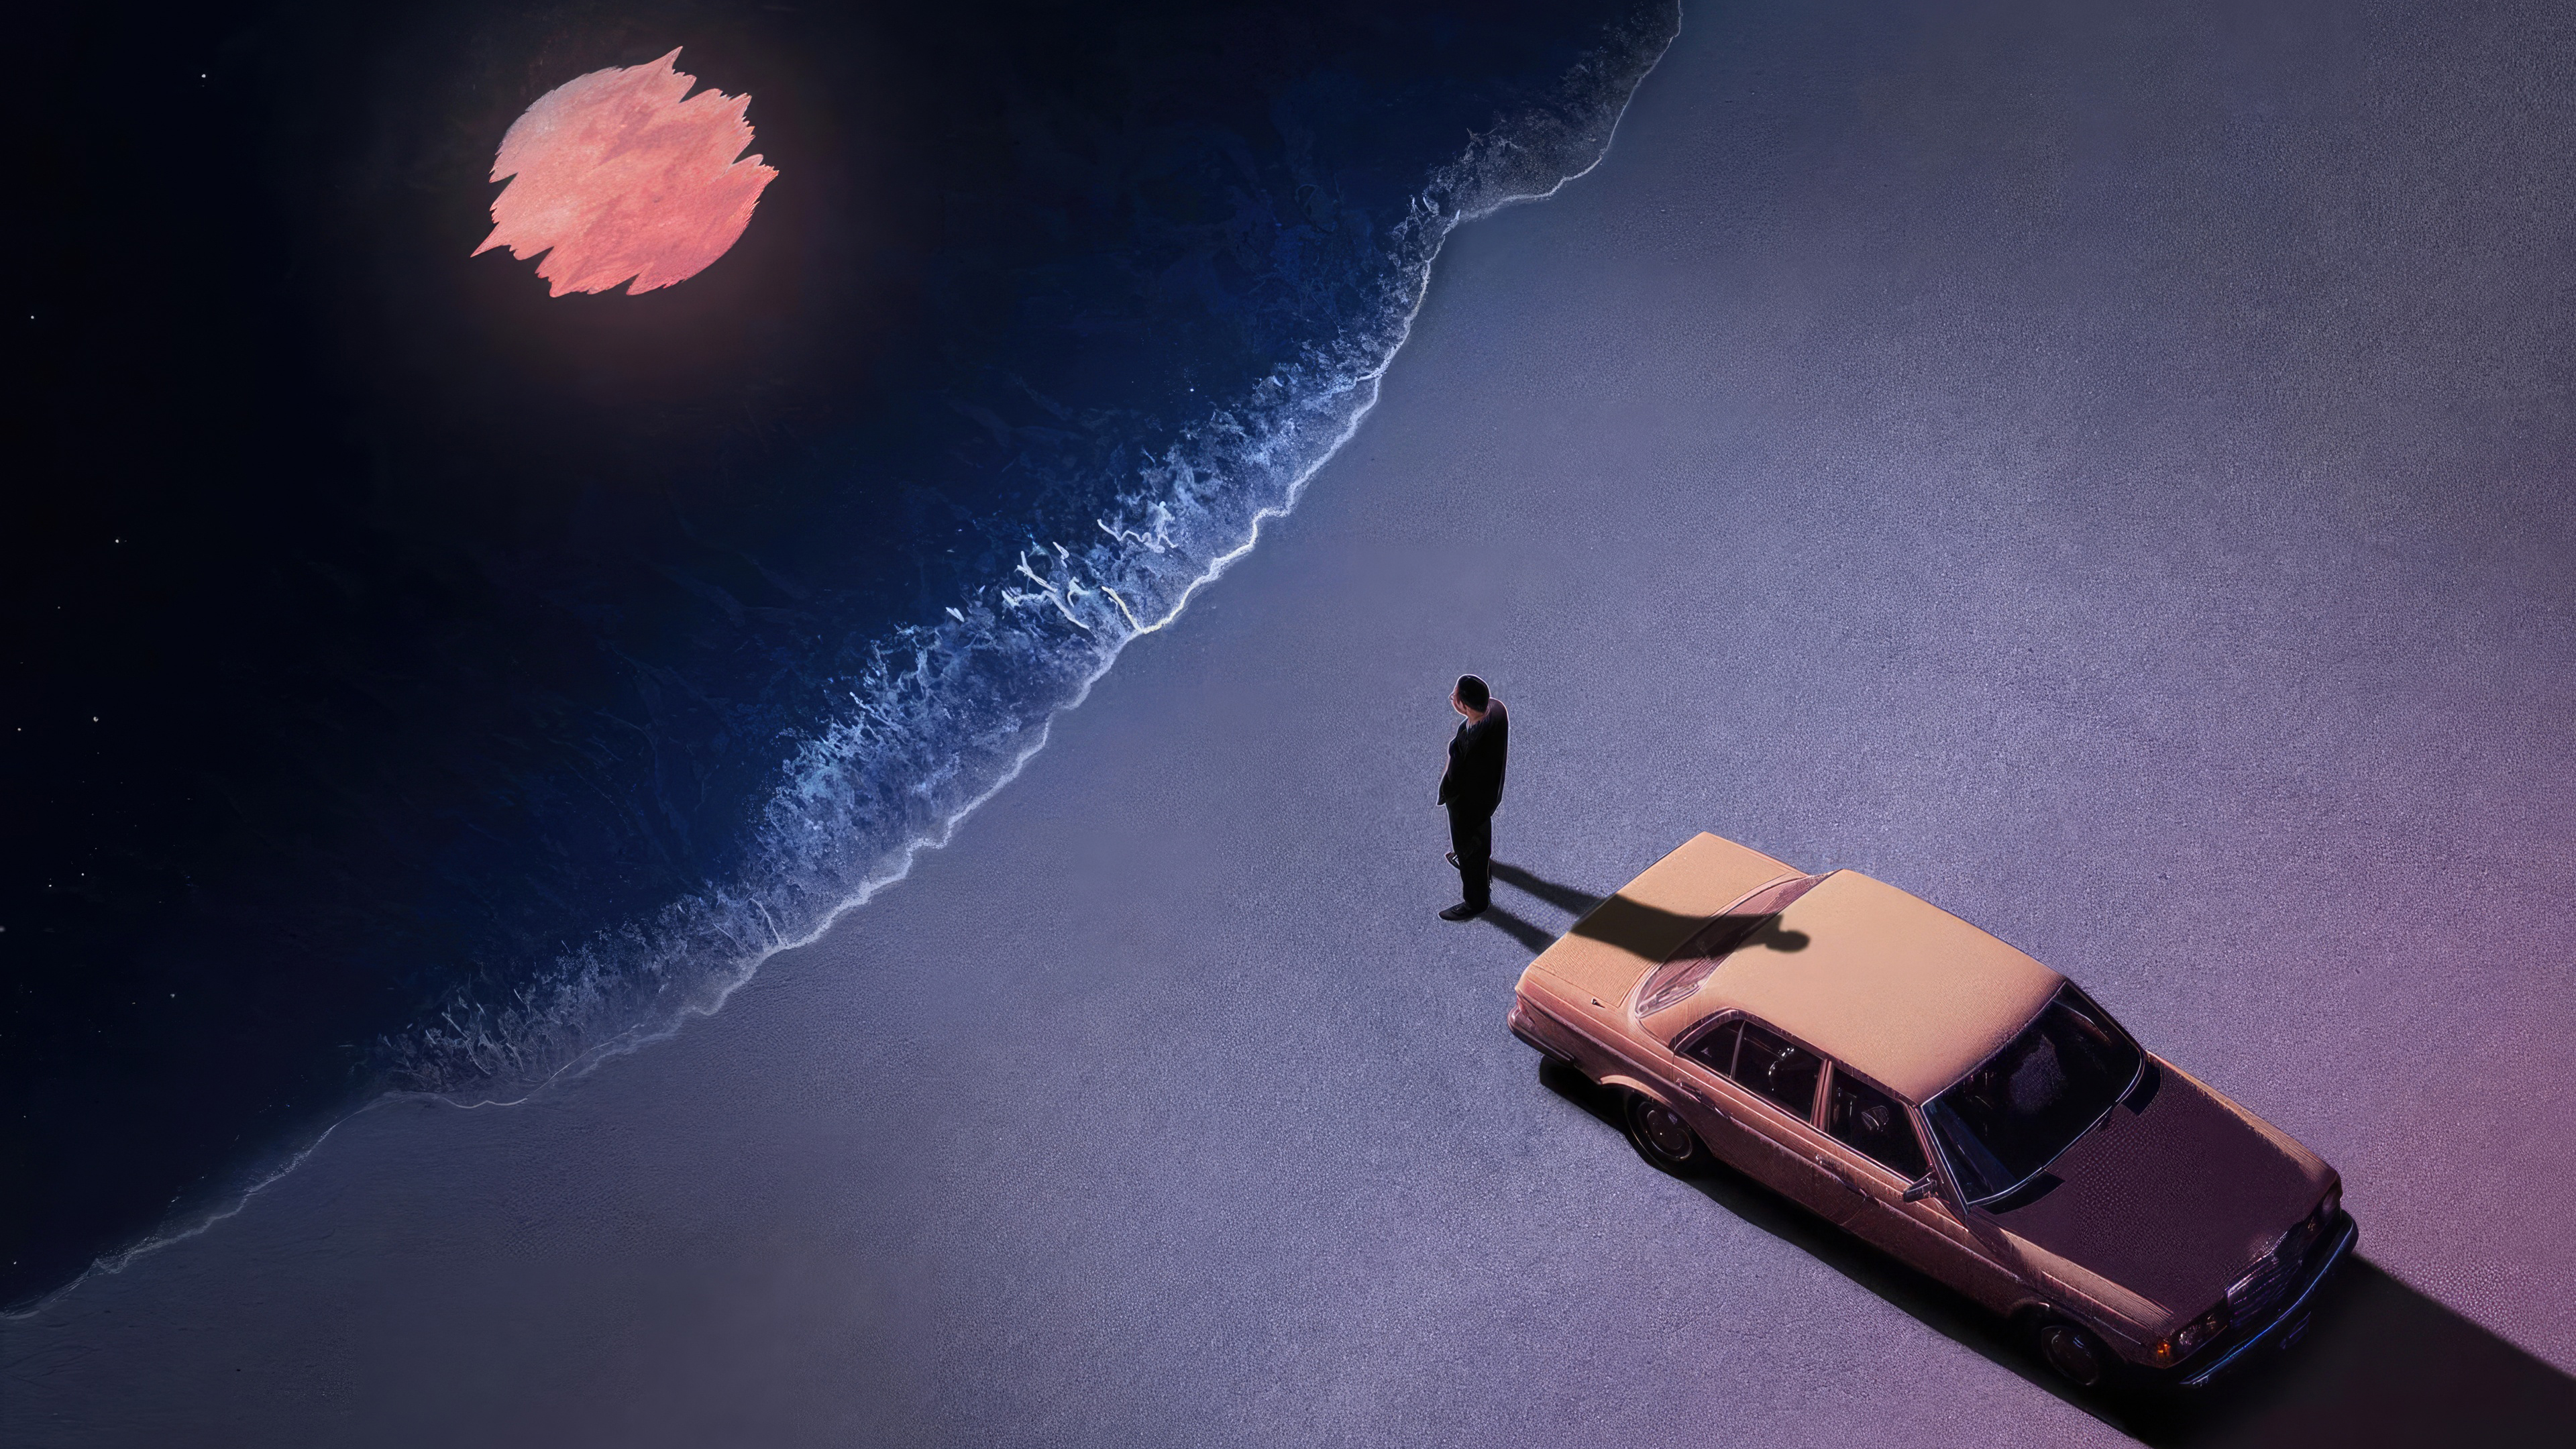 Lonely at night at the beach, car and man, art , 3840x2160 wallpaper